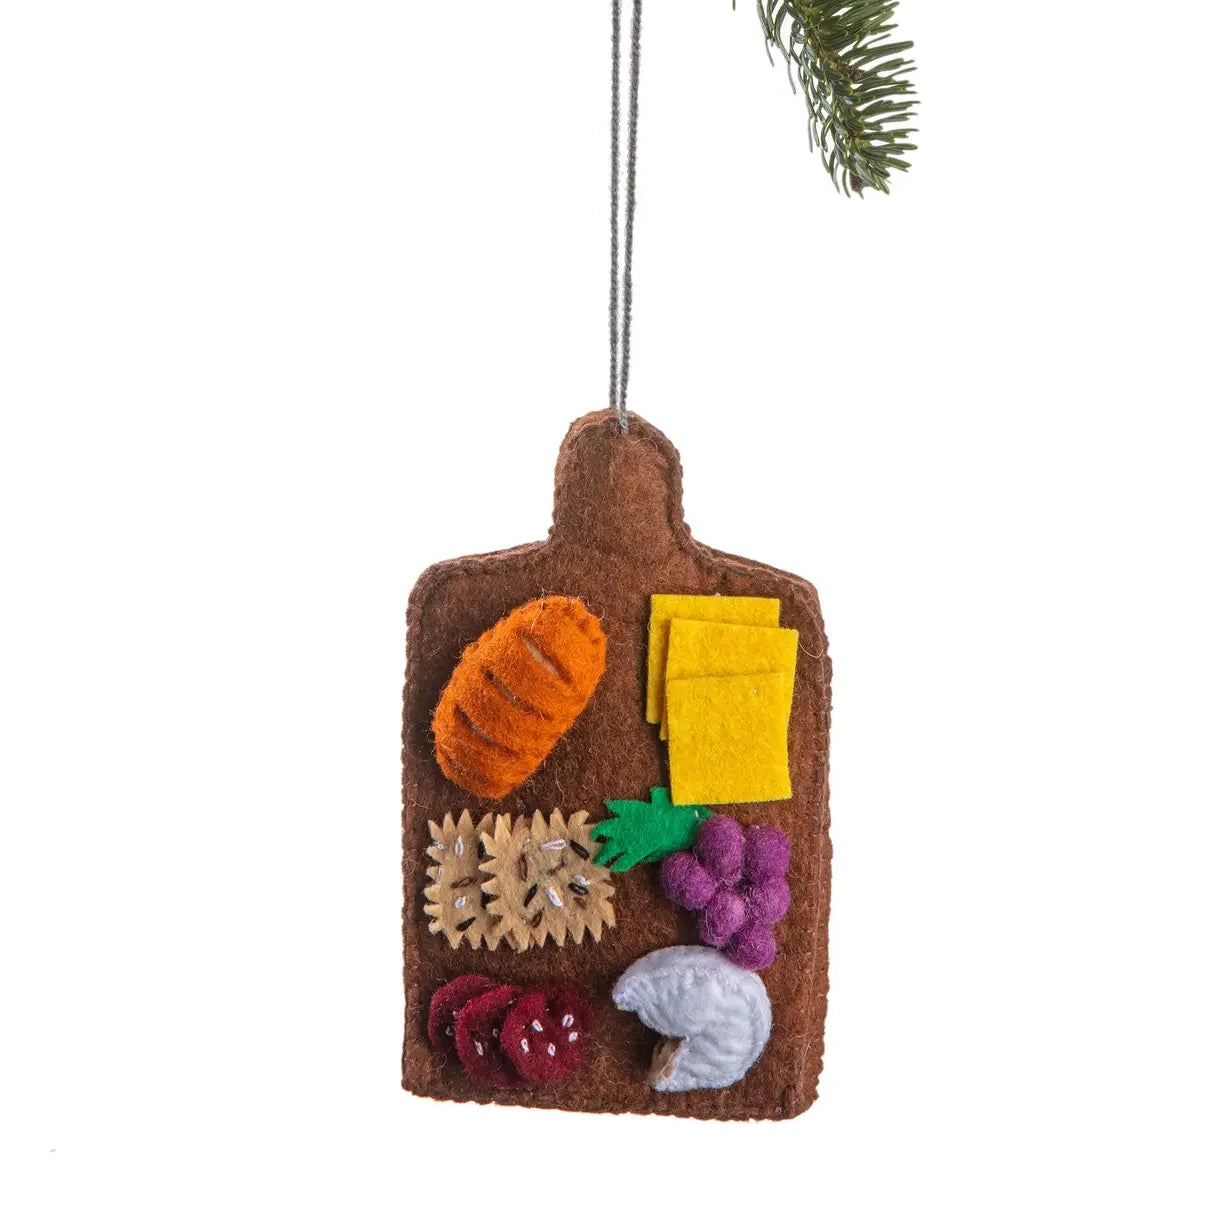 Charcuterie and Cheese Board Felt Ornament